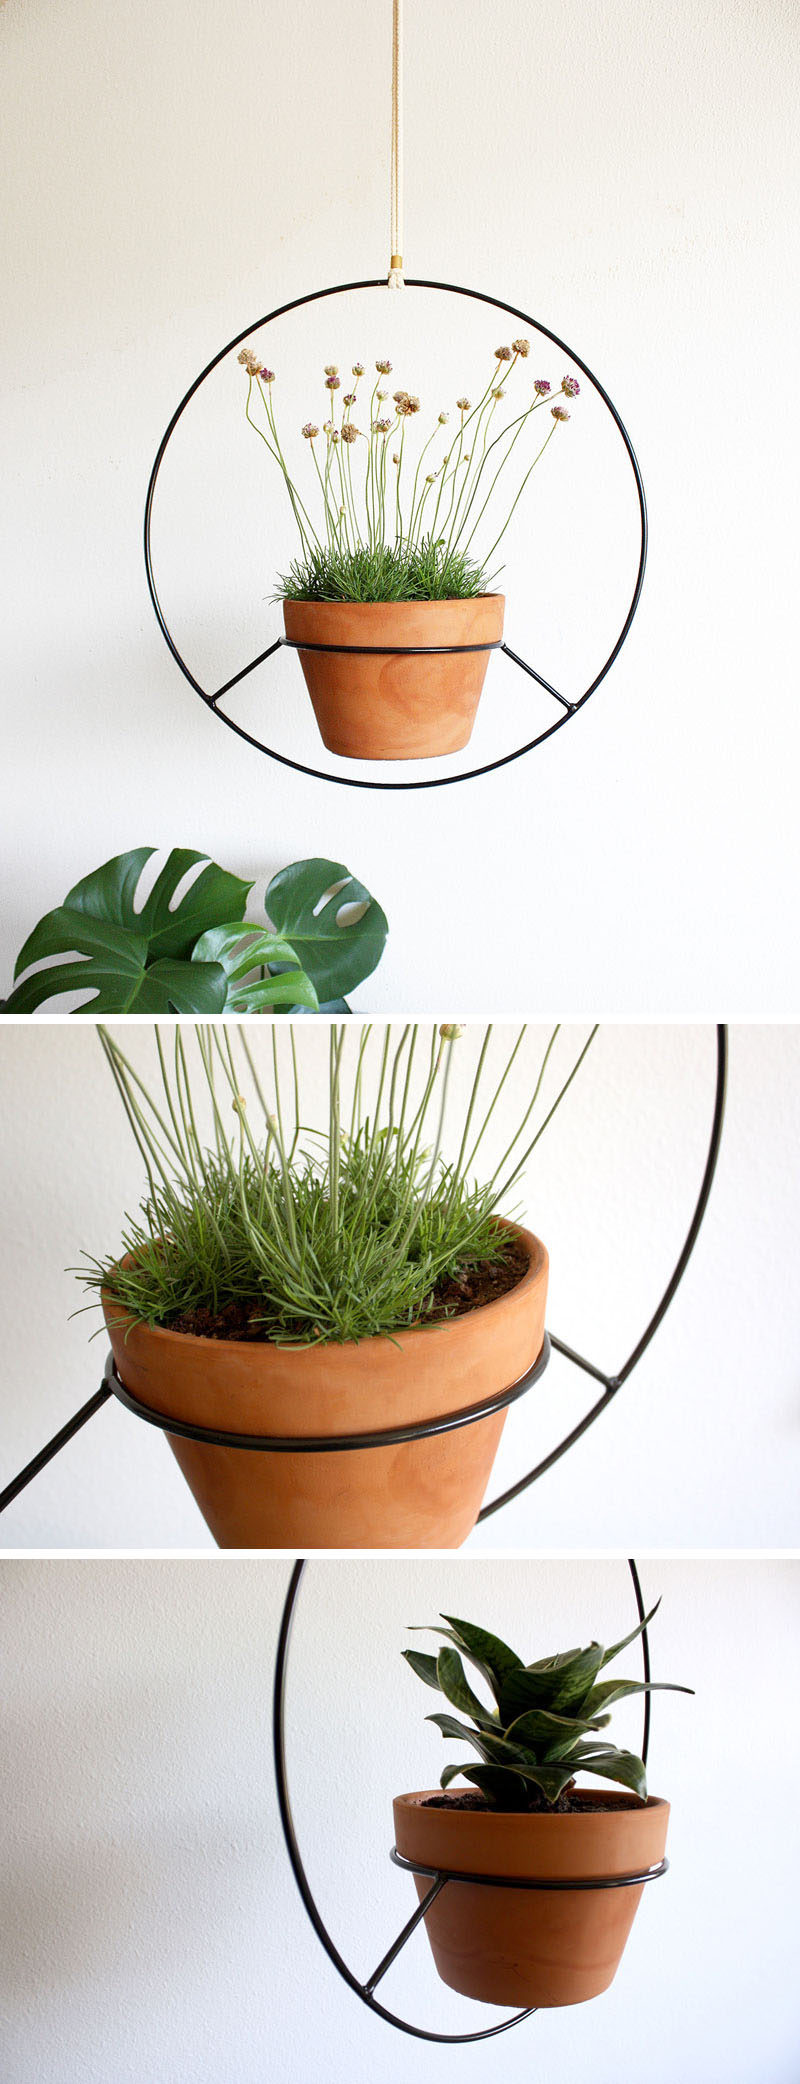 Inspired by vintage hanging plant holders, Angie Johnson has created this modern black hanging planter.